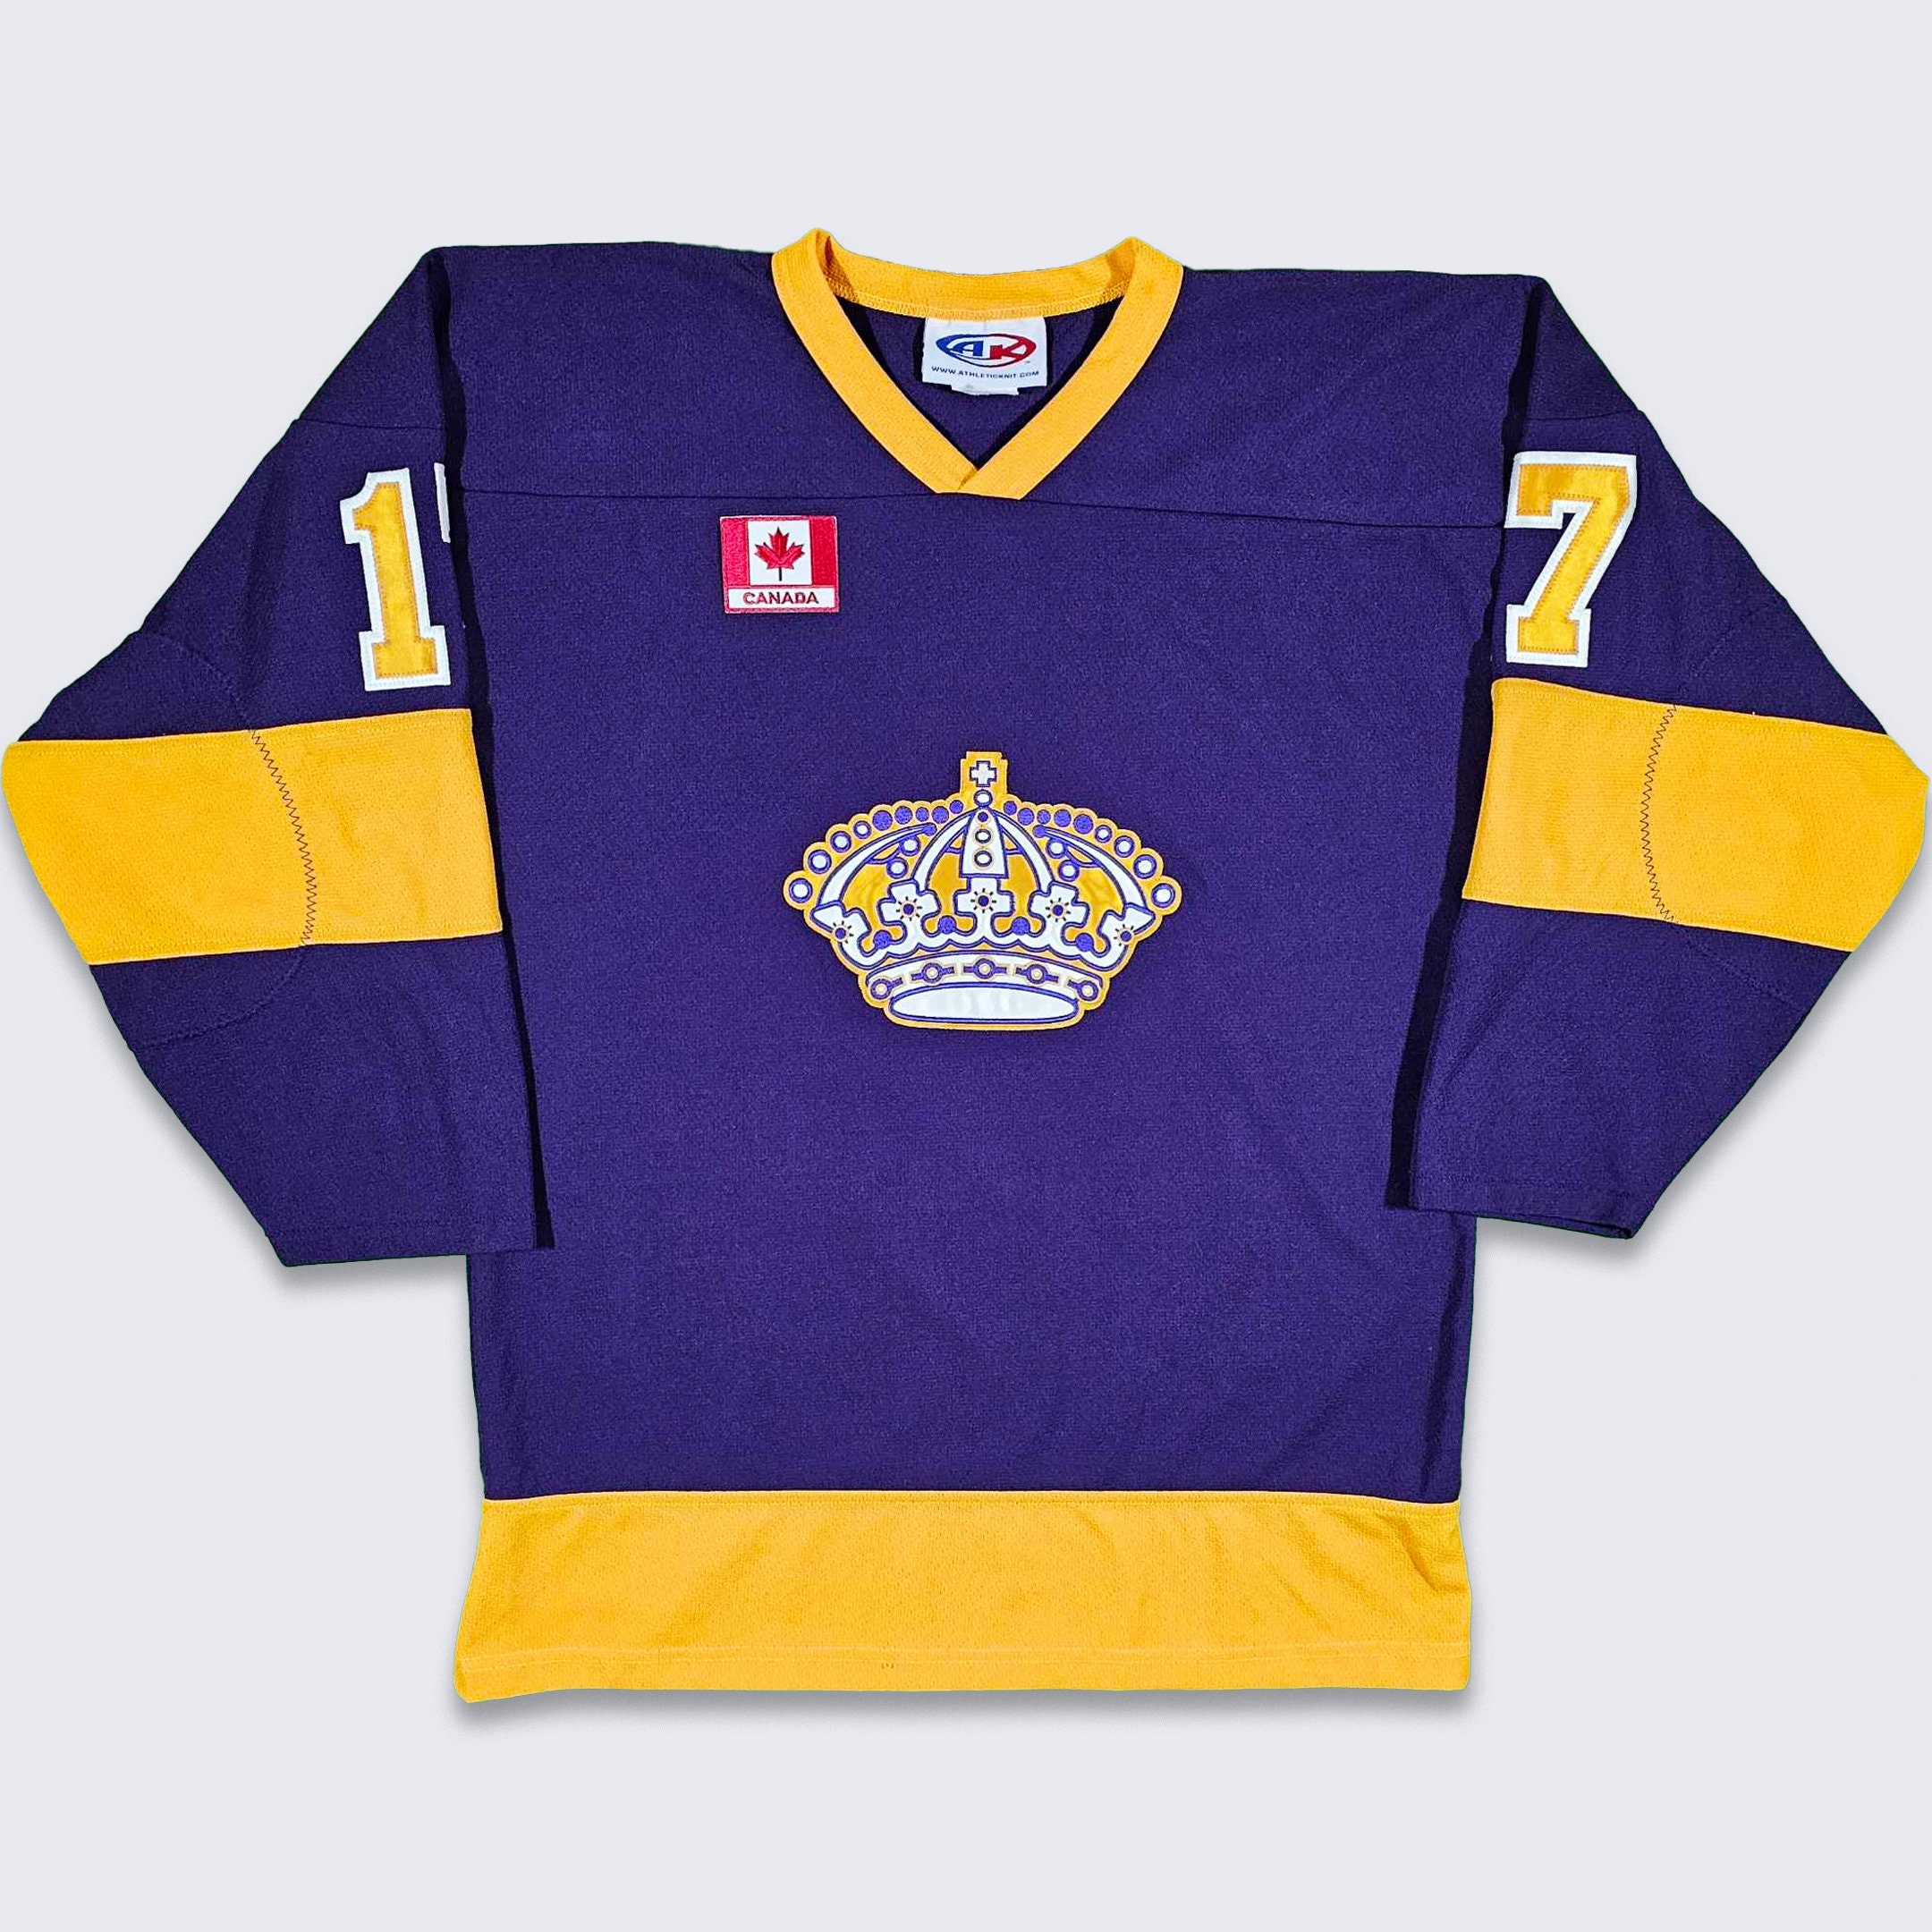 LA Kings “bring back the purple” redesign conceptalso a yellow throwback  : r/hockeyjerseys